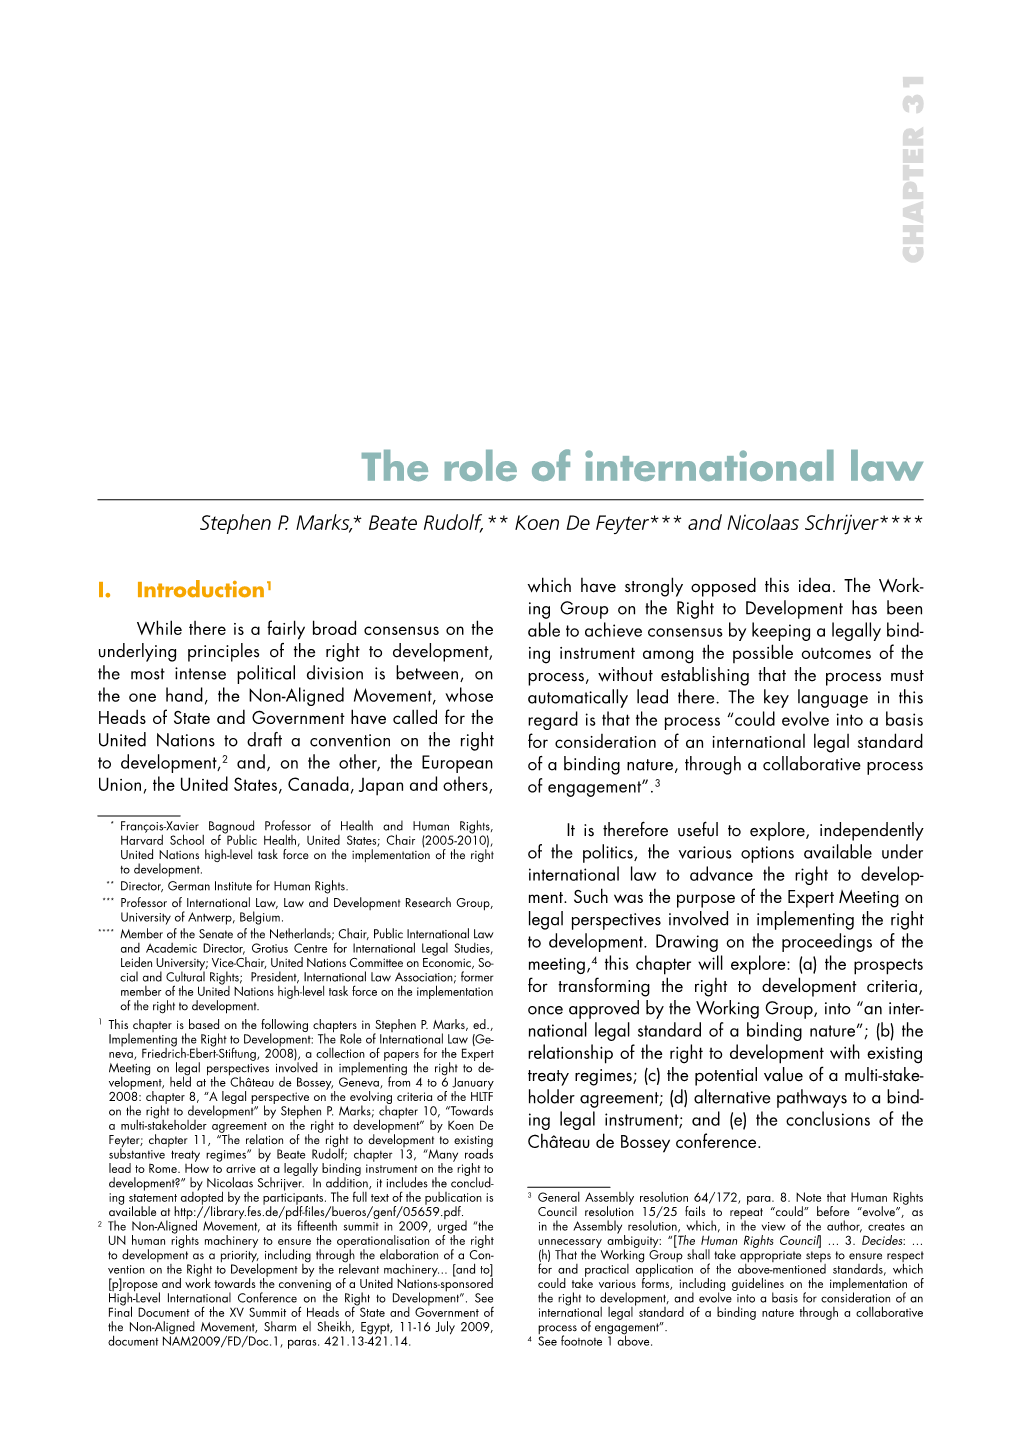 The Role of International Law